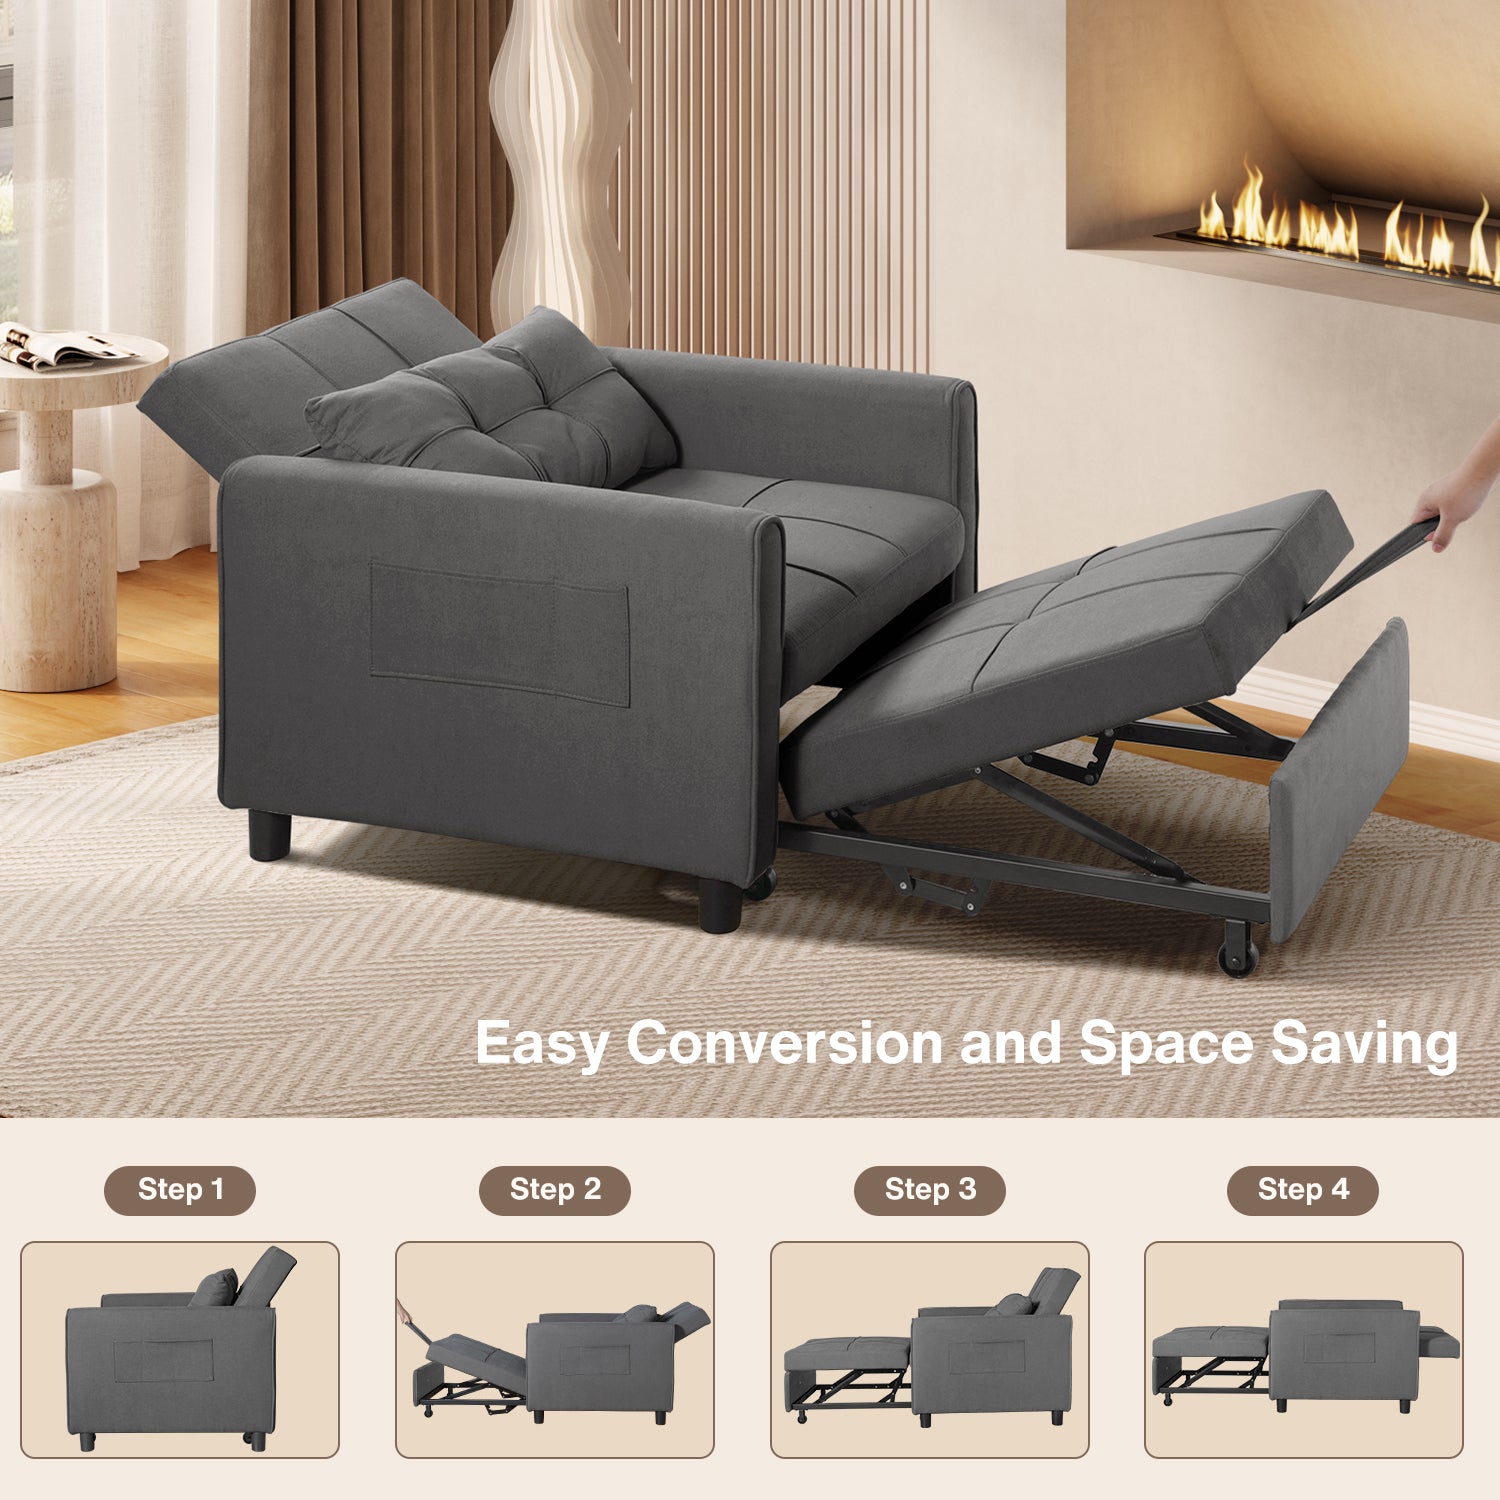 Gizoon AR20 Convertible Sleeper Sofa Chair Bed with Pillow and Pocket